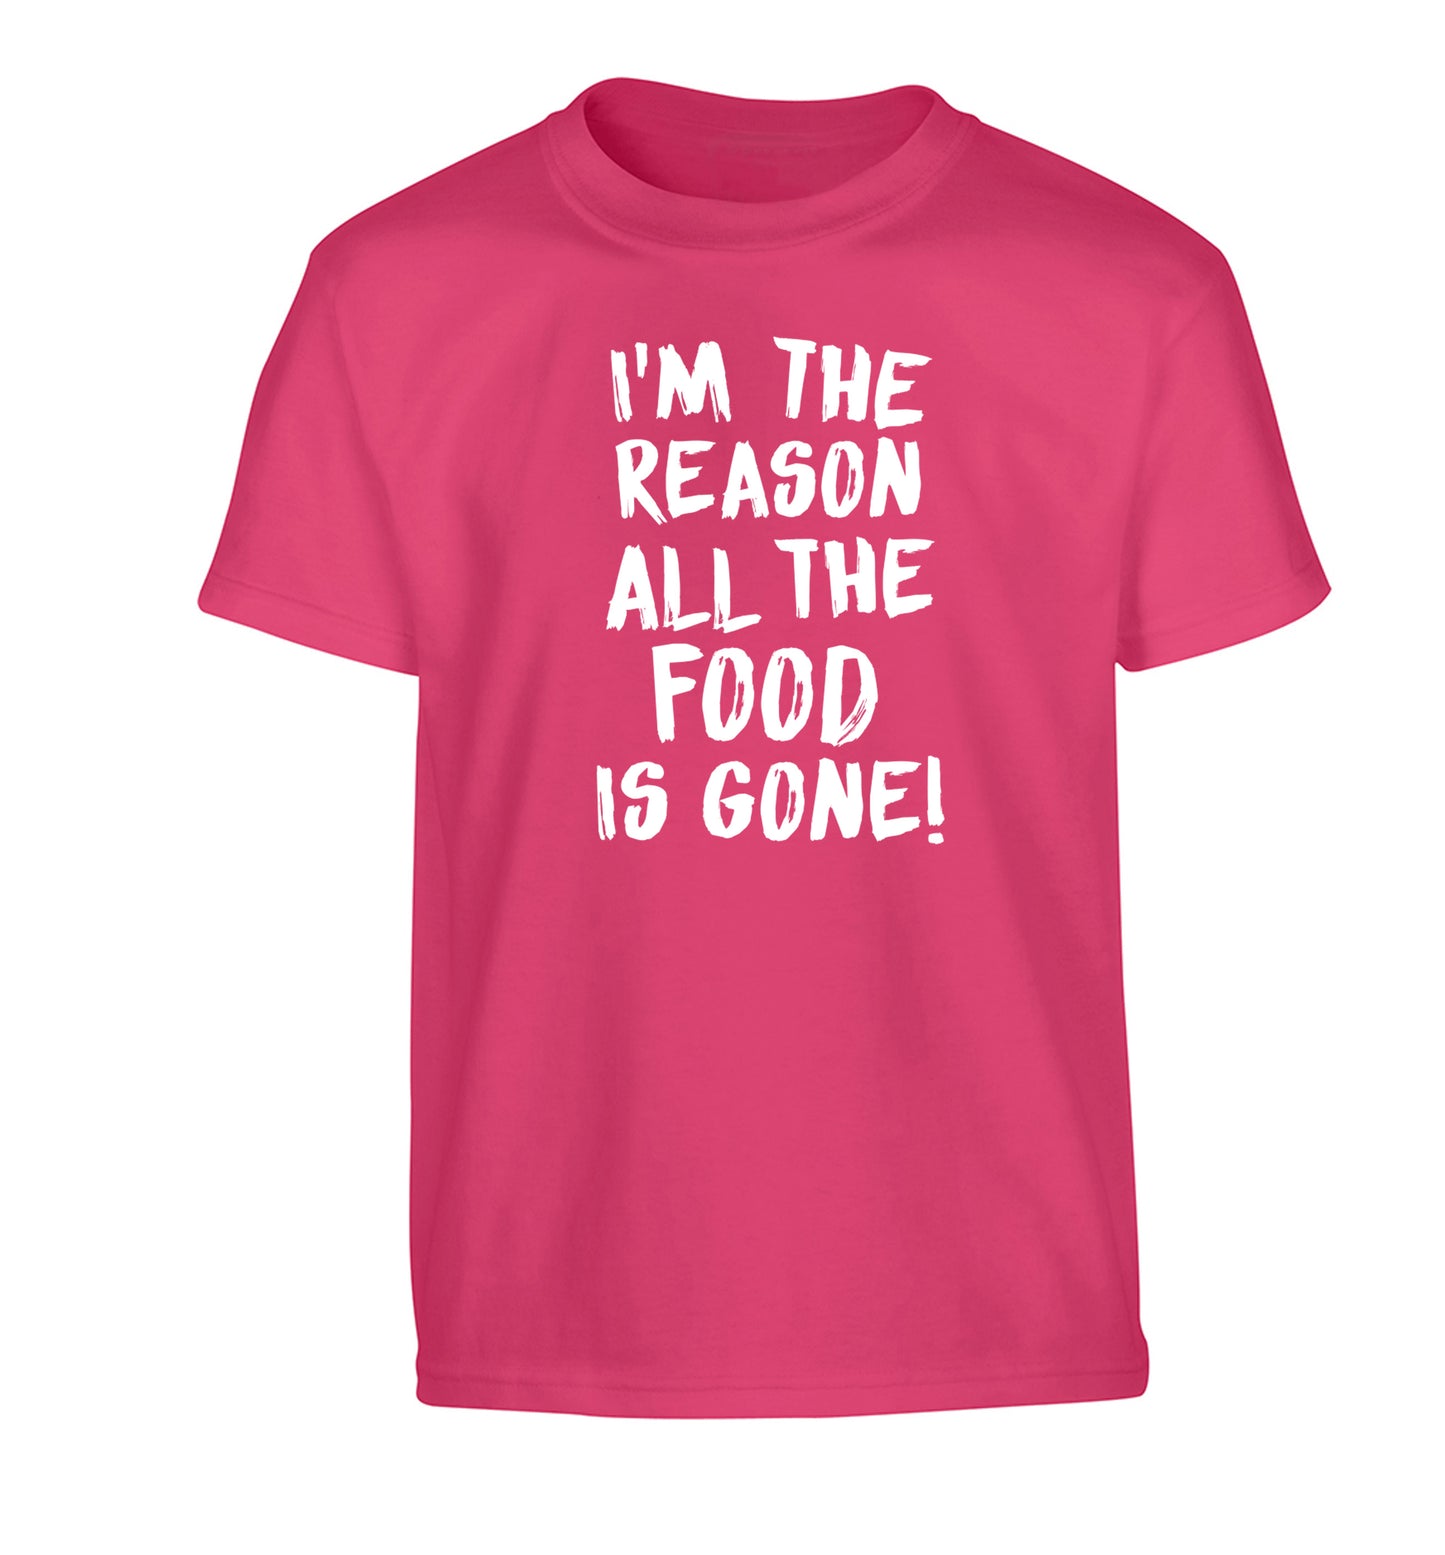 I'm the reason why all the food is gone Children's pink Tshirt 12-13 Years